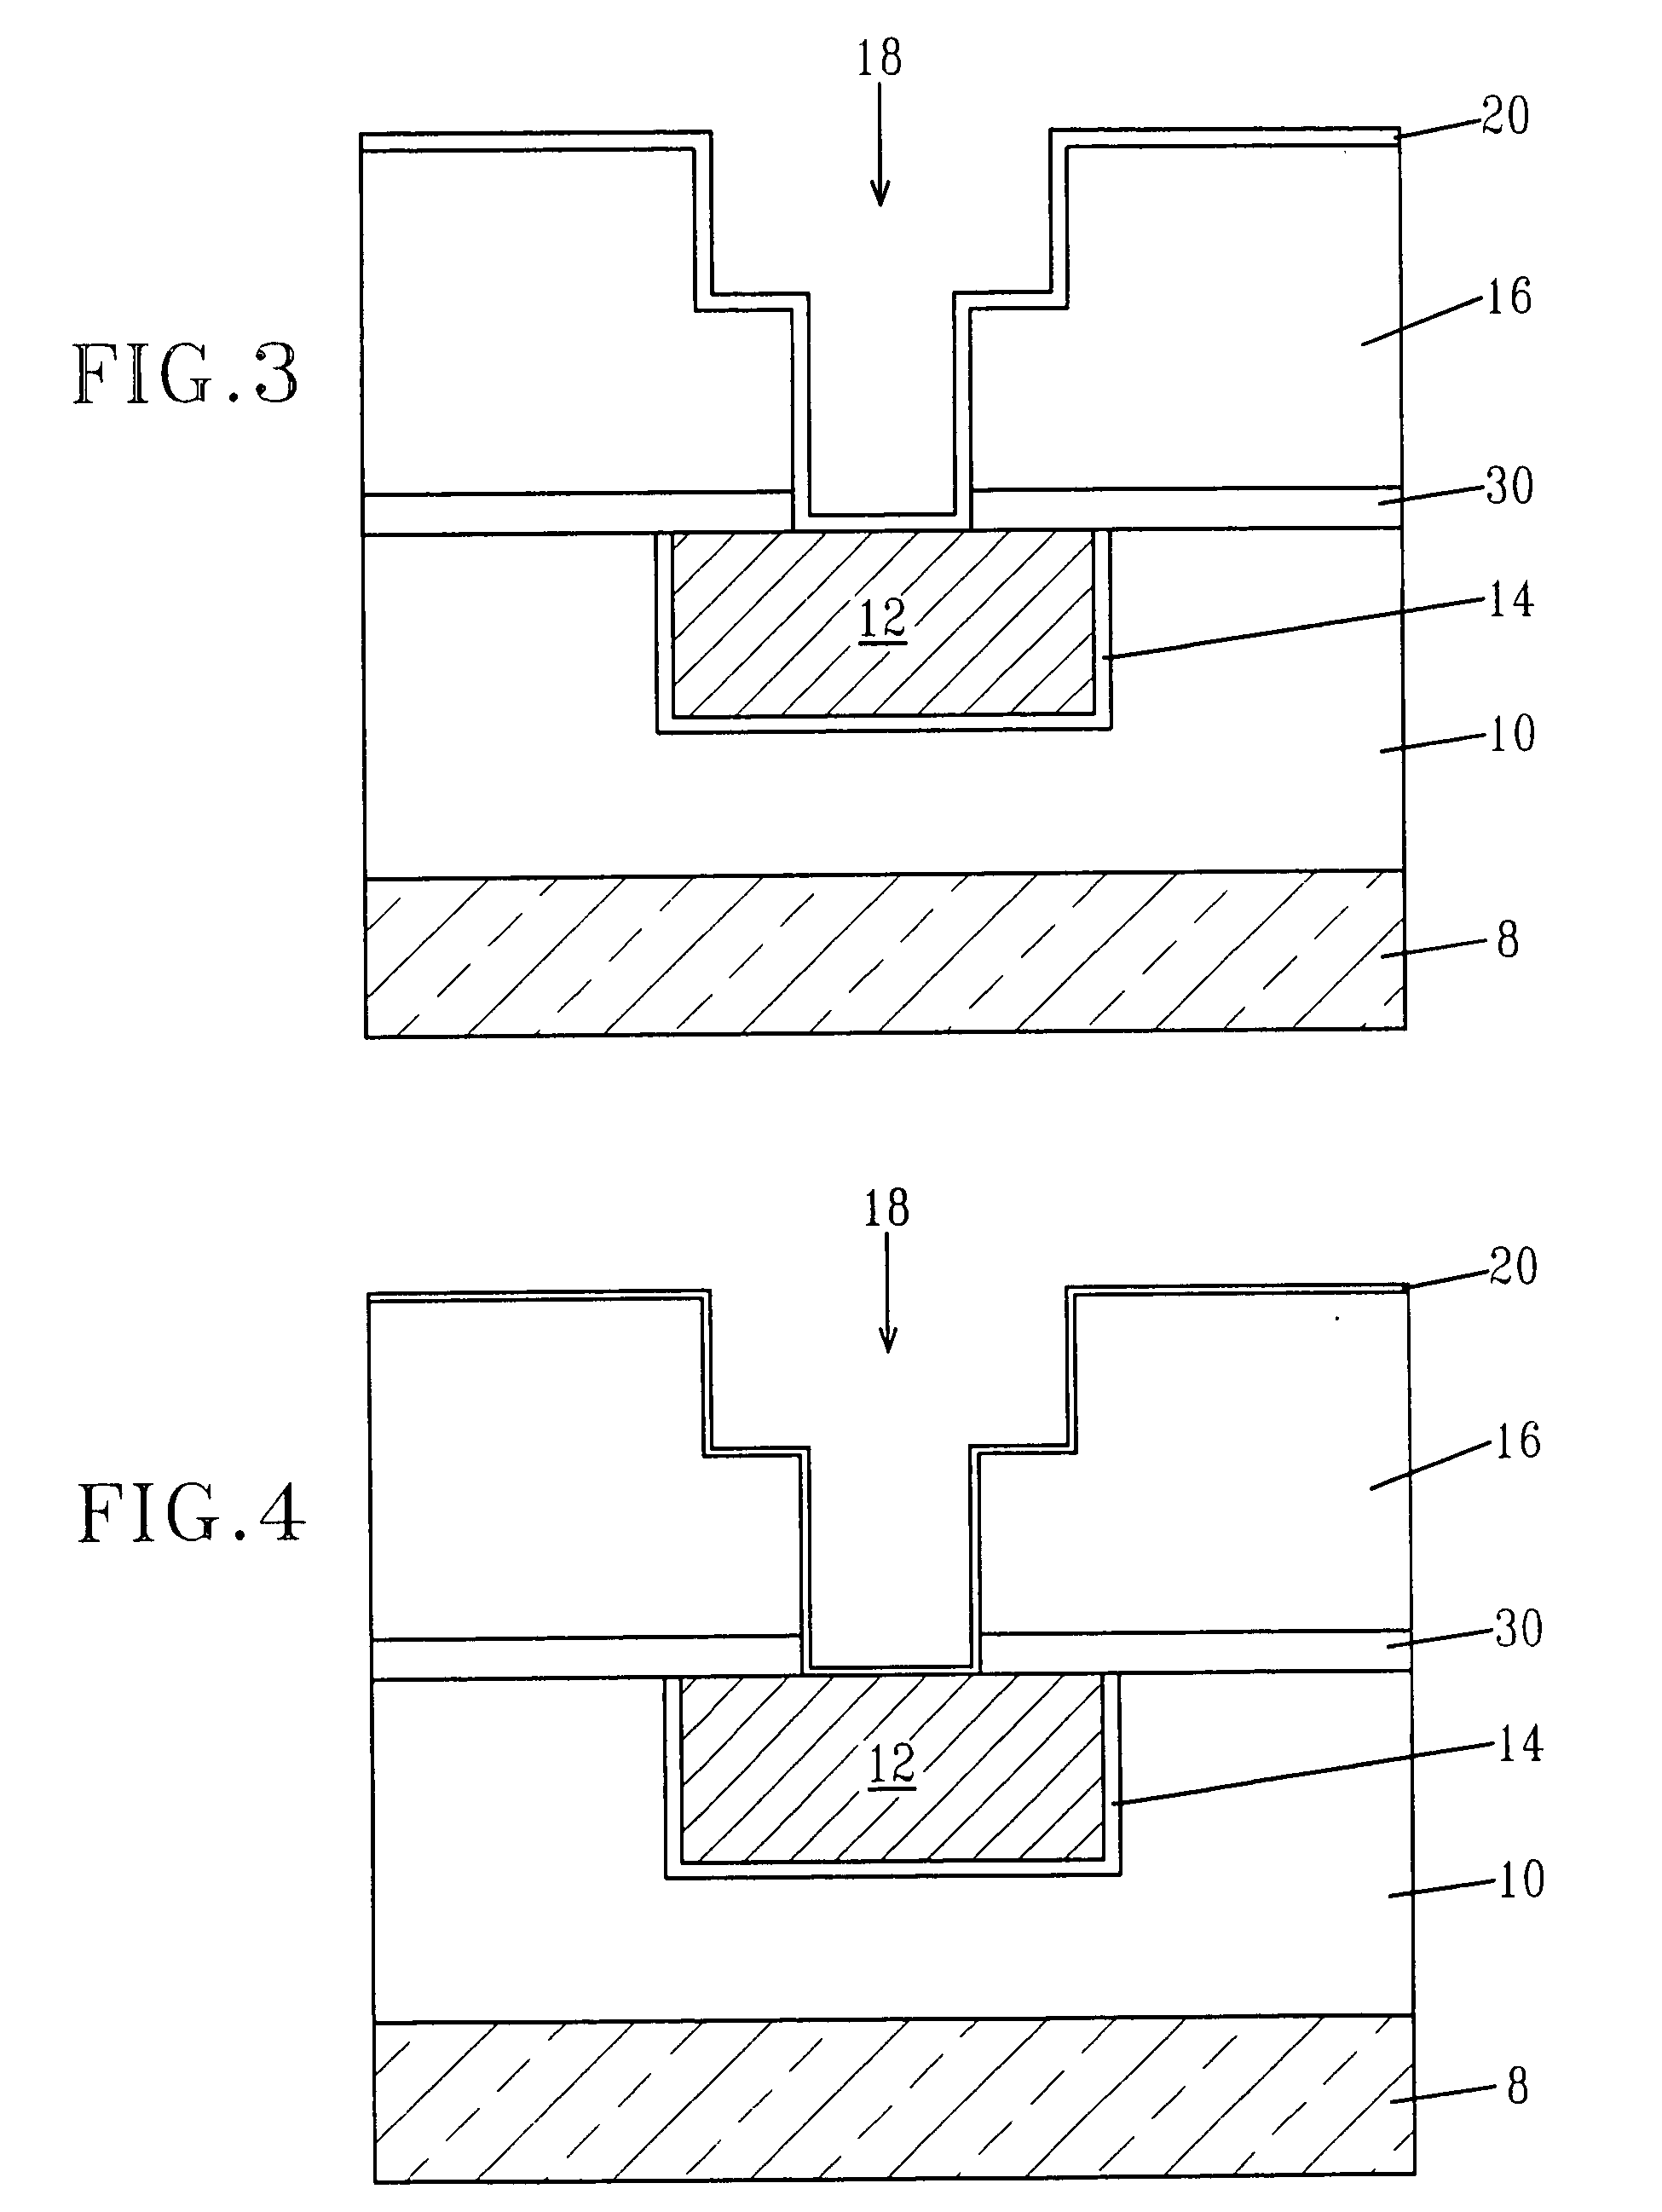 Process for forming an electrically conductive interconnect